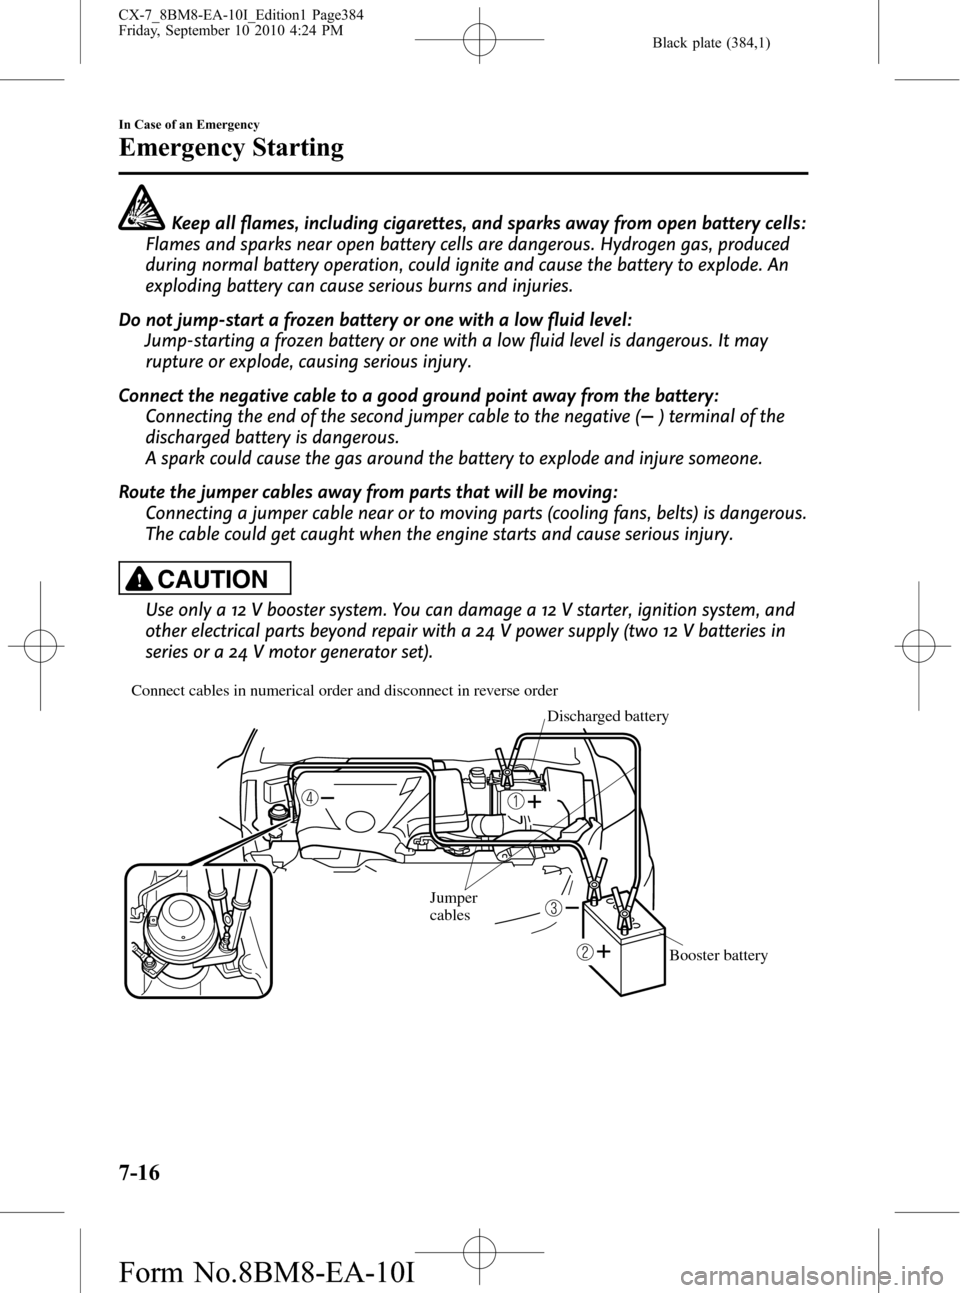 MAZDA MODEL CX-7 2011  Owners Manual (in English) Black plate (384,1)
Keep all flames, including cigarettes, and sparks away from open battery cells:
Flames and sparks near open battery cells are dangerous. Hydrogen gas, produced
during normal batter